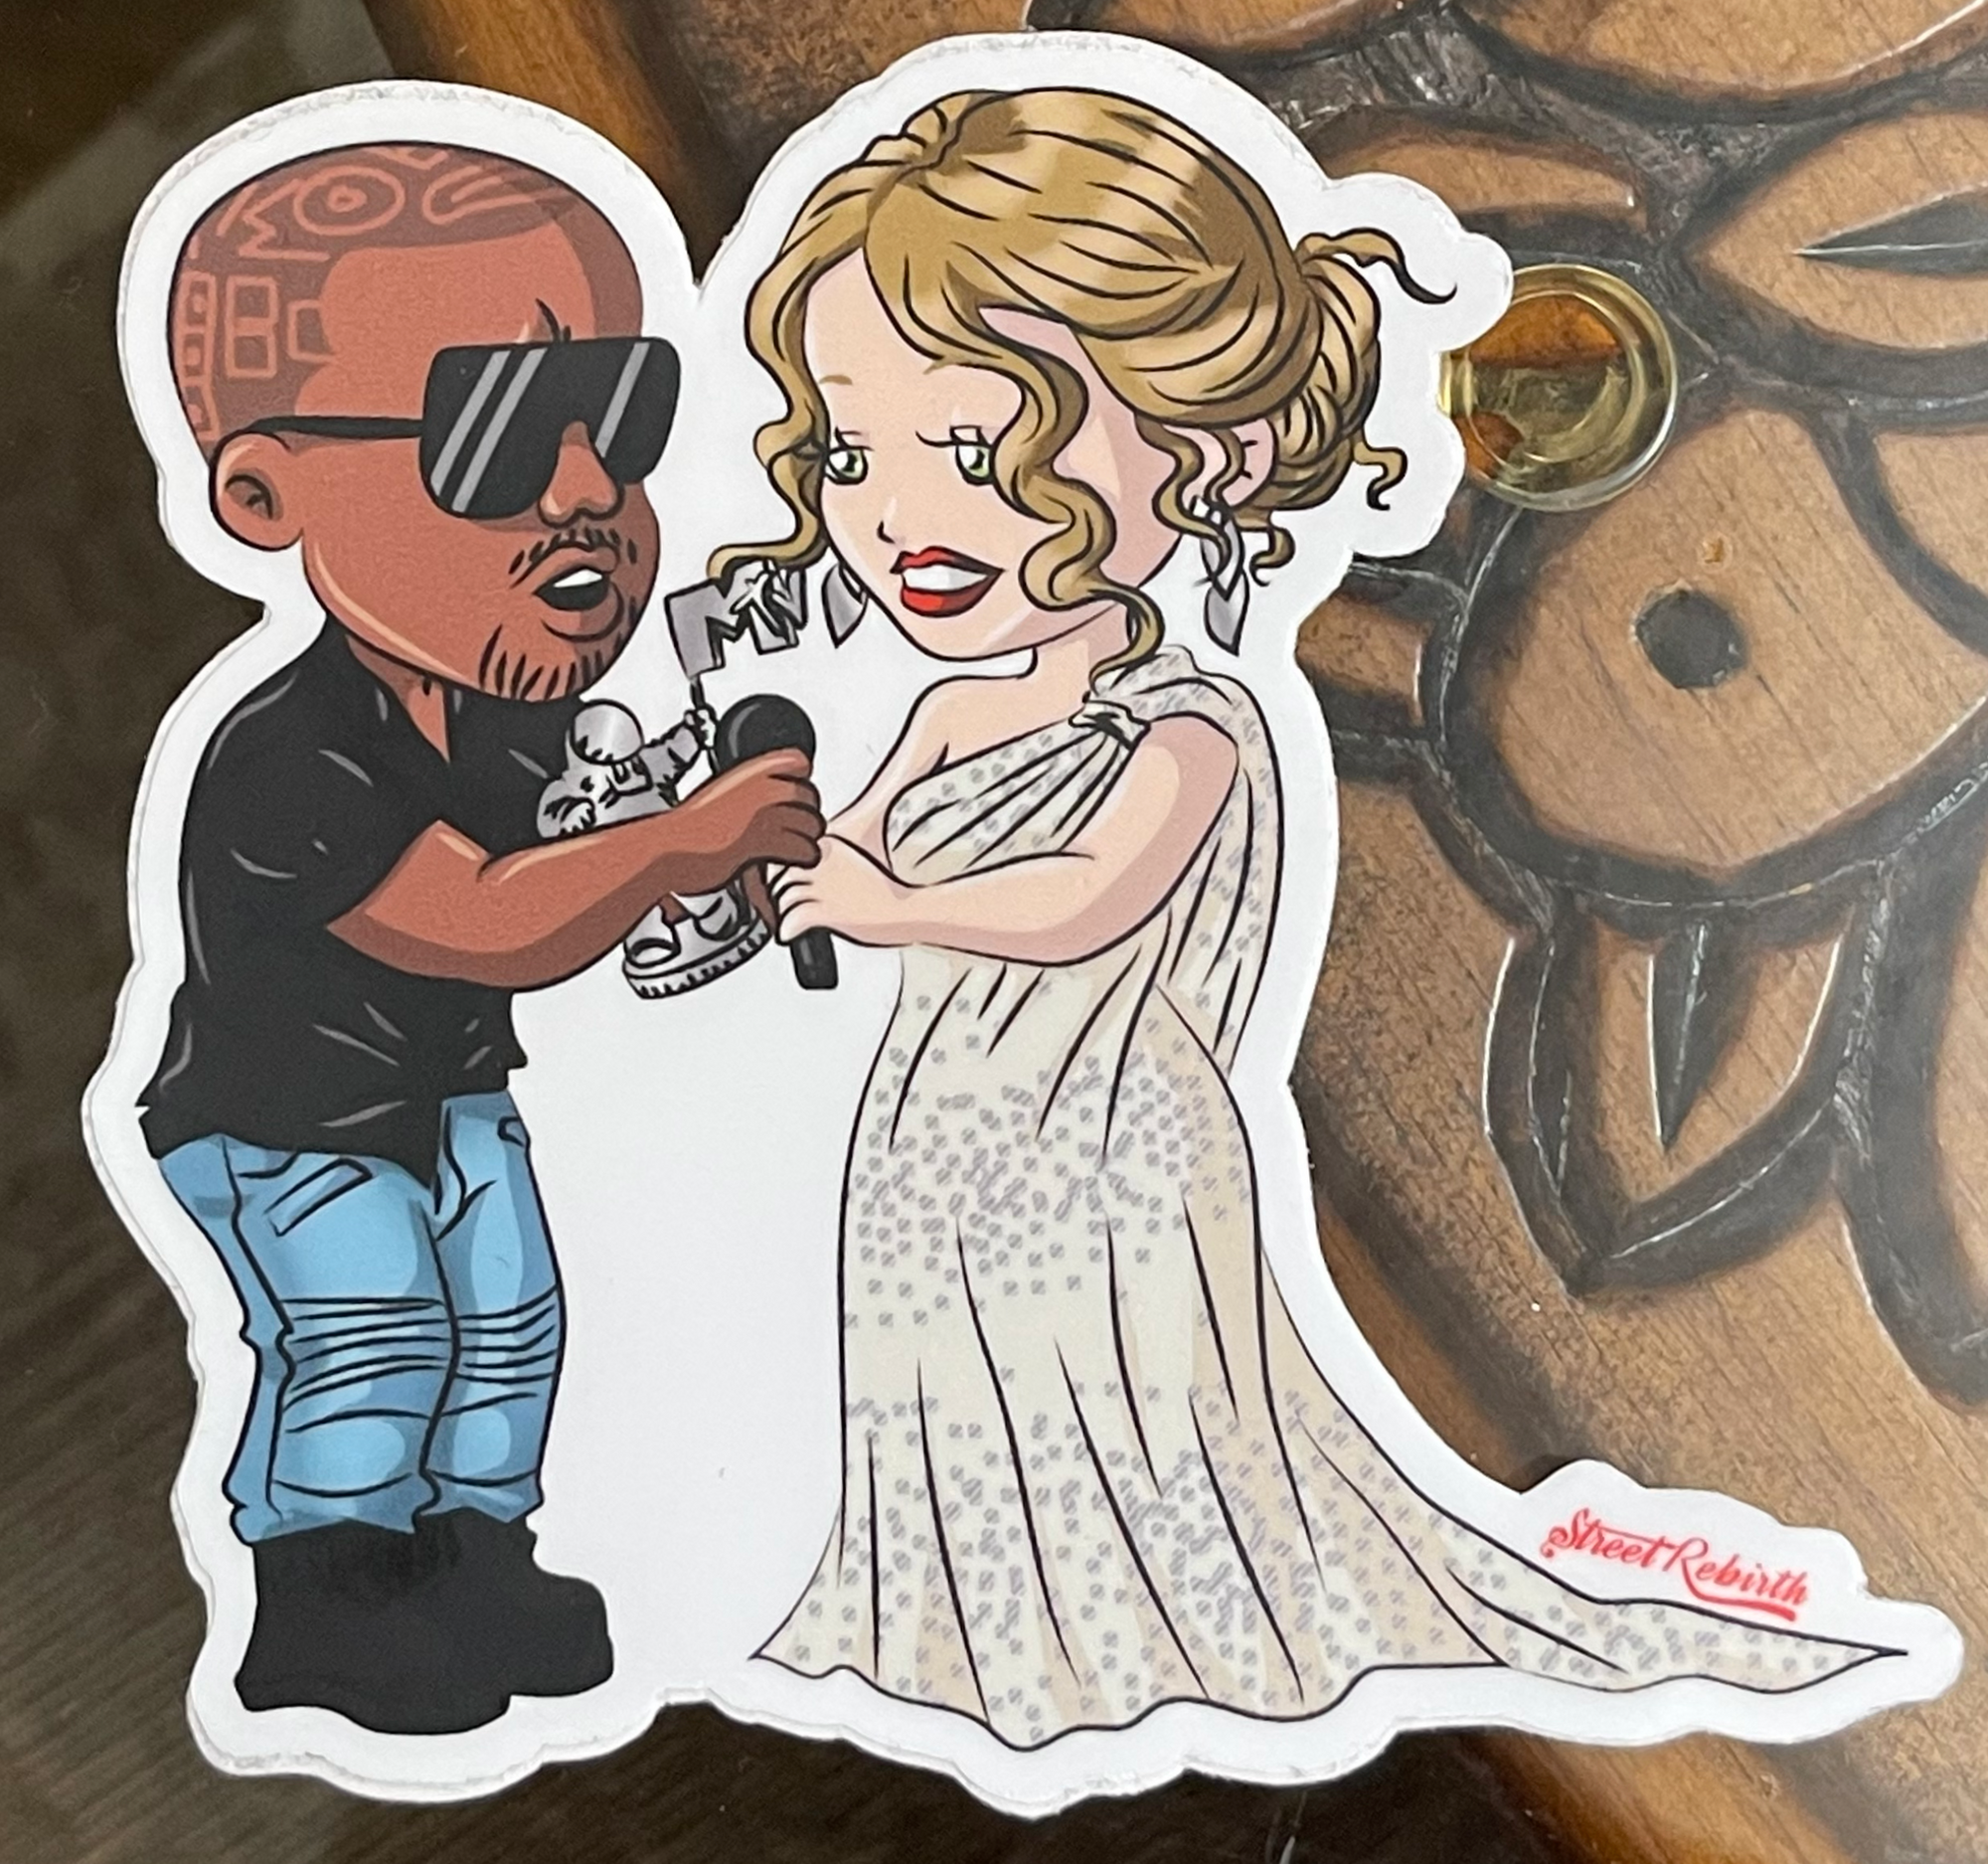 I'ma Let You Finish, BUT Ye Sticker – One 4 Inch Water Proof Vinyl Sticker – For Hydro Flask, Skateboard, Laptop, Planner, Car, Collecting, Gifting